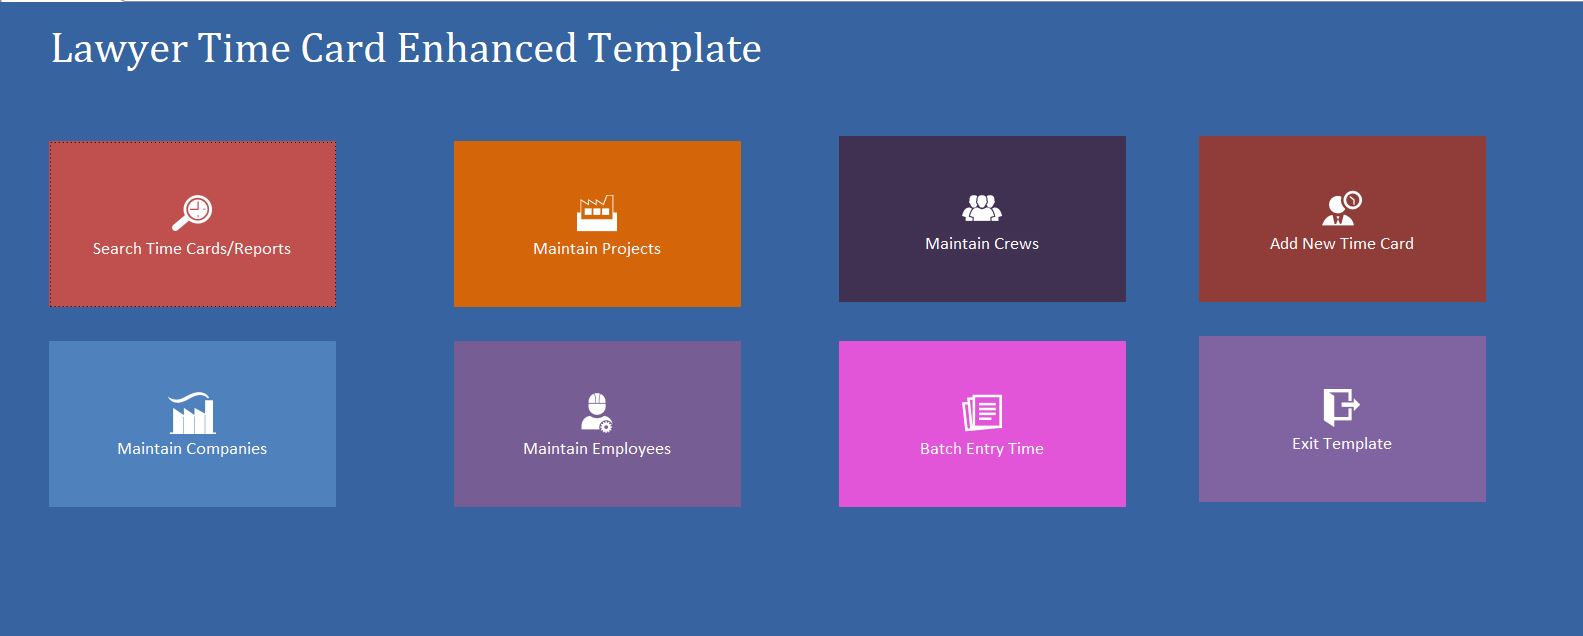 Enhanced Lawyer Time Card Template | Time Card Database